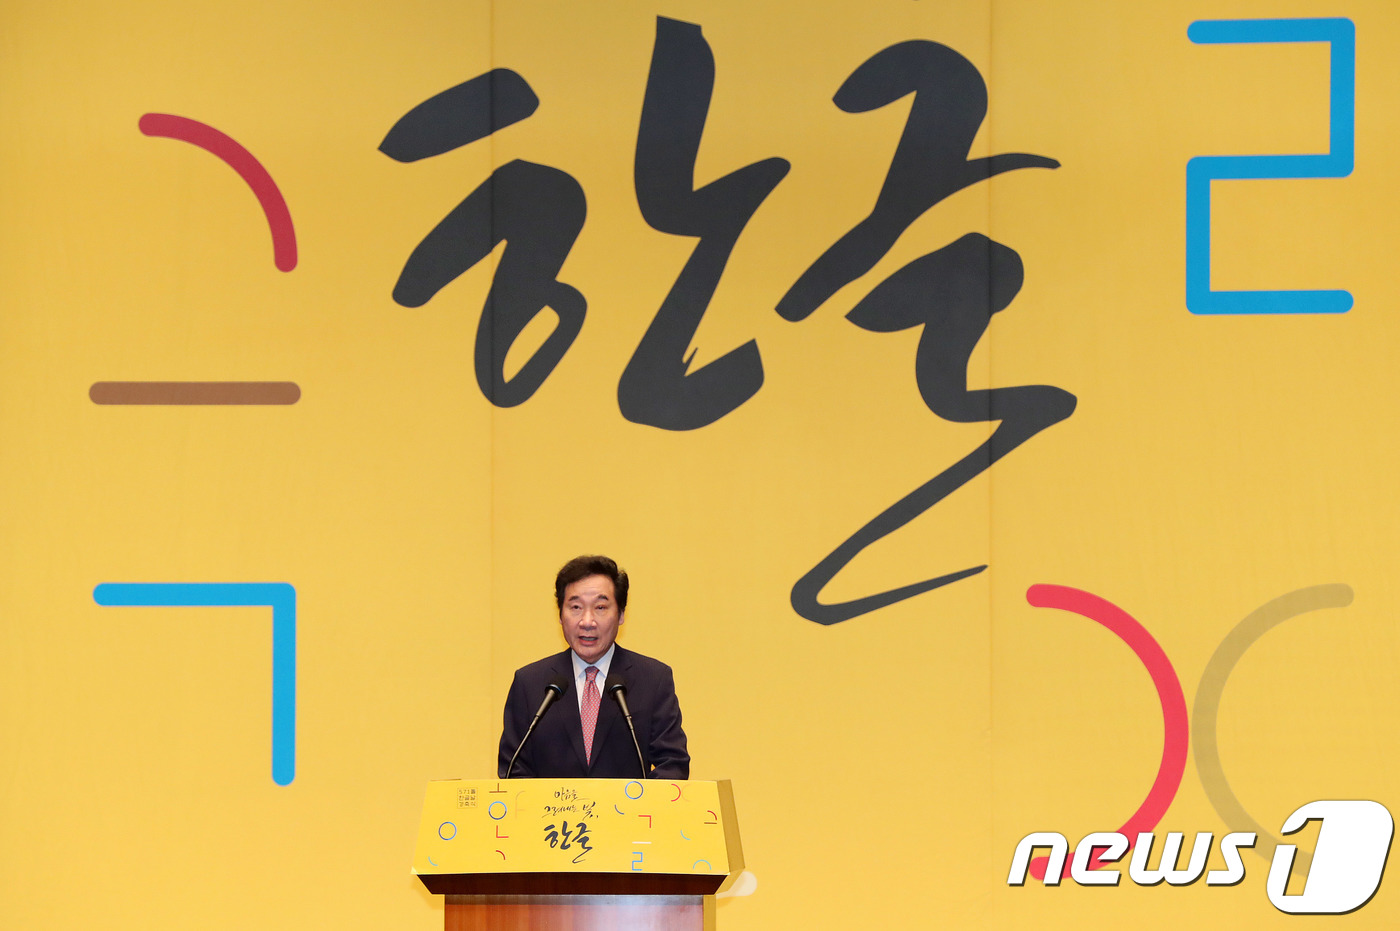 Lee said at the 572nd Hangul Day celebration held at Gwanghwamun Square in Seoul this morning, Hangeul is not our own writing.The Sejong Institute, which was 13 European schools in 2007, has increased to 57 European schools and 174 schools by this year. The young people of World write down the BTSs Korean lyrics in Korean and sing together, Lee said. The government decided yesterday at State Council to give a medal to the proud BTS.The government held a State Council at the Blue House on the previous day (8th) presided over by President Moon Jae-in and decided to award the Hwakwan Cultural Medal to seven members of BTS for their merits in the development of popular culture and arts (the spread of Korean Wave).Lee also emphasized the intention of Sejong, who tried to communicate with the people in Hangul, as this year is the 600th anniversary of King Sejongs accession.Lee said, The women and common people of Joseon who did not know Hangul left my thoughts in Hangul and got knowledge and information.We kept the spirit of the Korean language in the Japanese colonial period and awakened it, he said. It was possible that the industrialization and democratization were achieved in a short period of time after liberation because of the high rate of deciphering the peoples letters.In addition, Lee explained the resumption of the big dictionary project between the two Koreas.The joint compilation project of the North-South Korean dictionary, which Pastor Moon Ik-hwan visited in 1989 and agreed with President Kim Il-sung at the time, is a project to make the first Bran jointly by Korean scholars from the two Koreas.Lee said, When King Sejong gave Hangul, our country was one, but the World Cold War broke the two sides of the country and the land. The 70th year of the division of the country is changing the meaning and use of the word from the South and the North. In 2005, the Roh Moo-hyun government began co-editing the Great Dictionary with North Korea, but this work stopped with the ups and downs of inter-Korean relations. The Moon Jae-in government is now trying to continue co-editing the big dictionary of the Korean people.Lee said, We can not delay the work of knowing and uniting things that have changed so much between the South and the North. I believe that if these things are accumulated and accumulated, the day when the South and the North are fully united like King Sejong can come soon.Lets all pledge to Sejong to work together. 572 stone Hangul Day celebration..Re-progression of the Korean-American dictionary with the government of the Korean government.